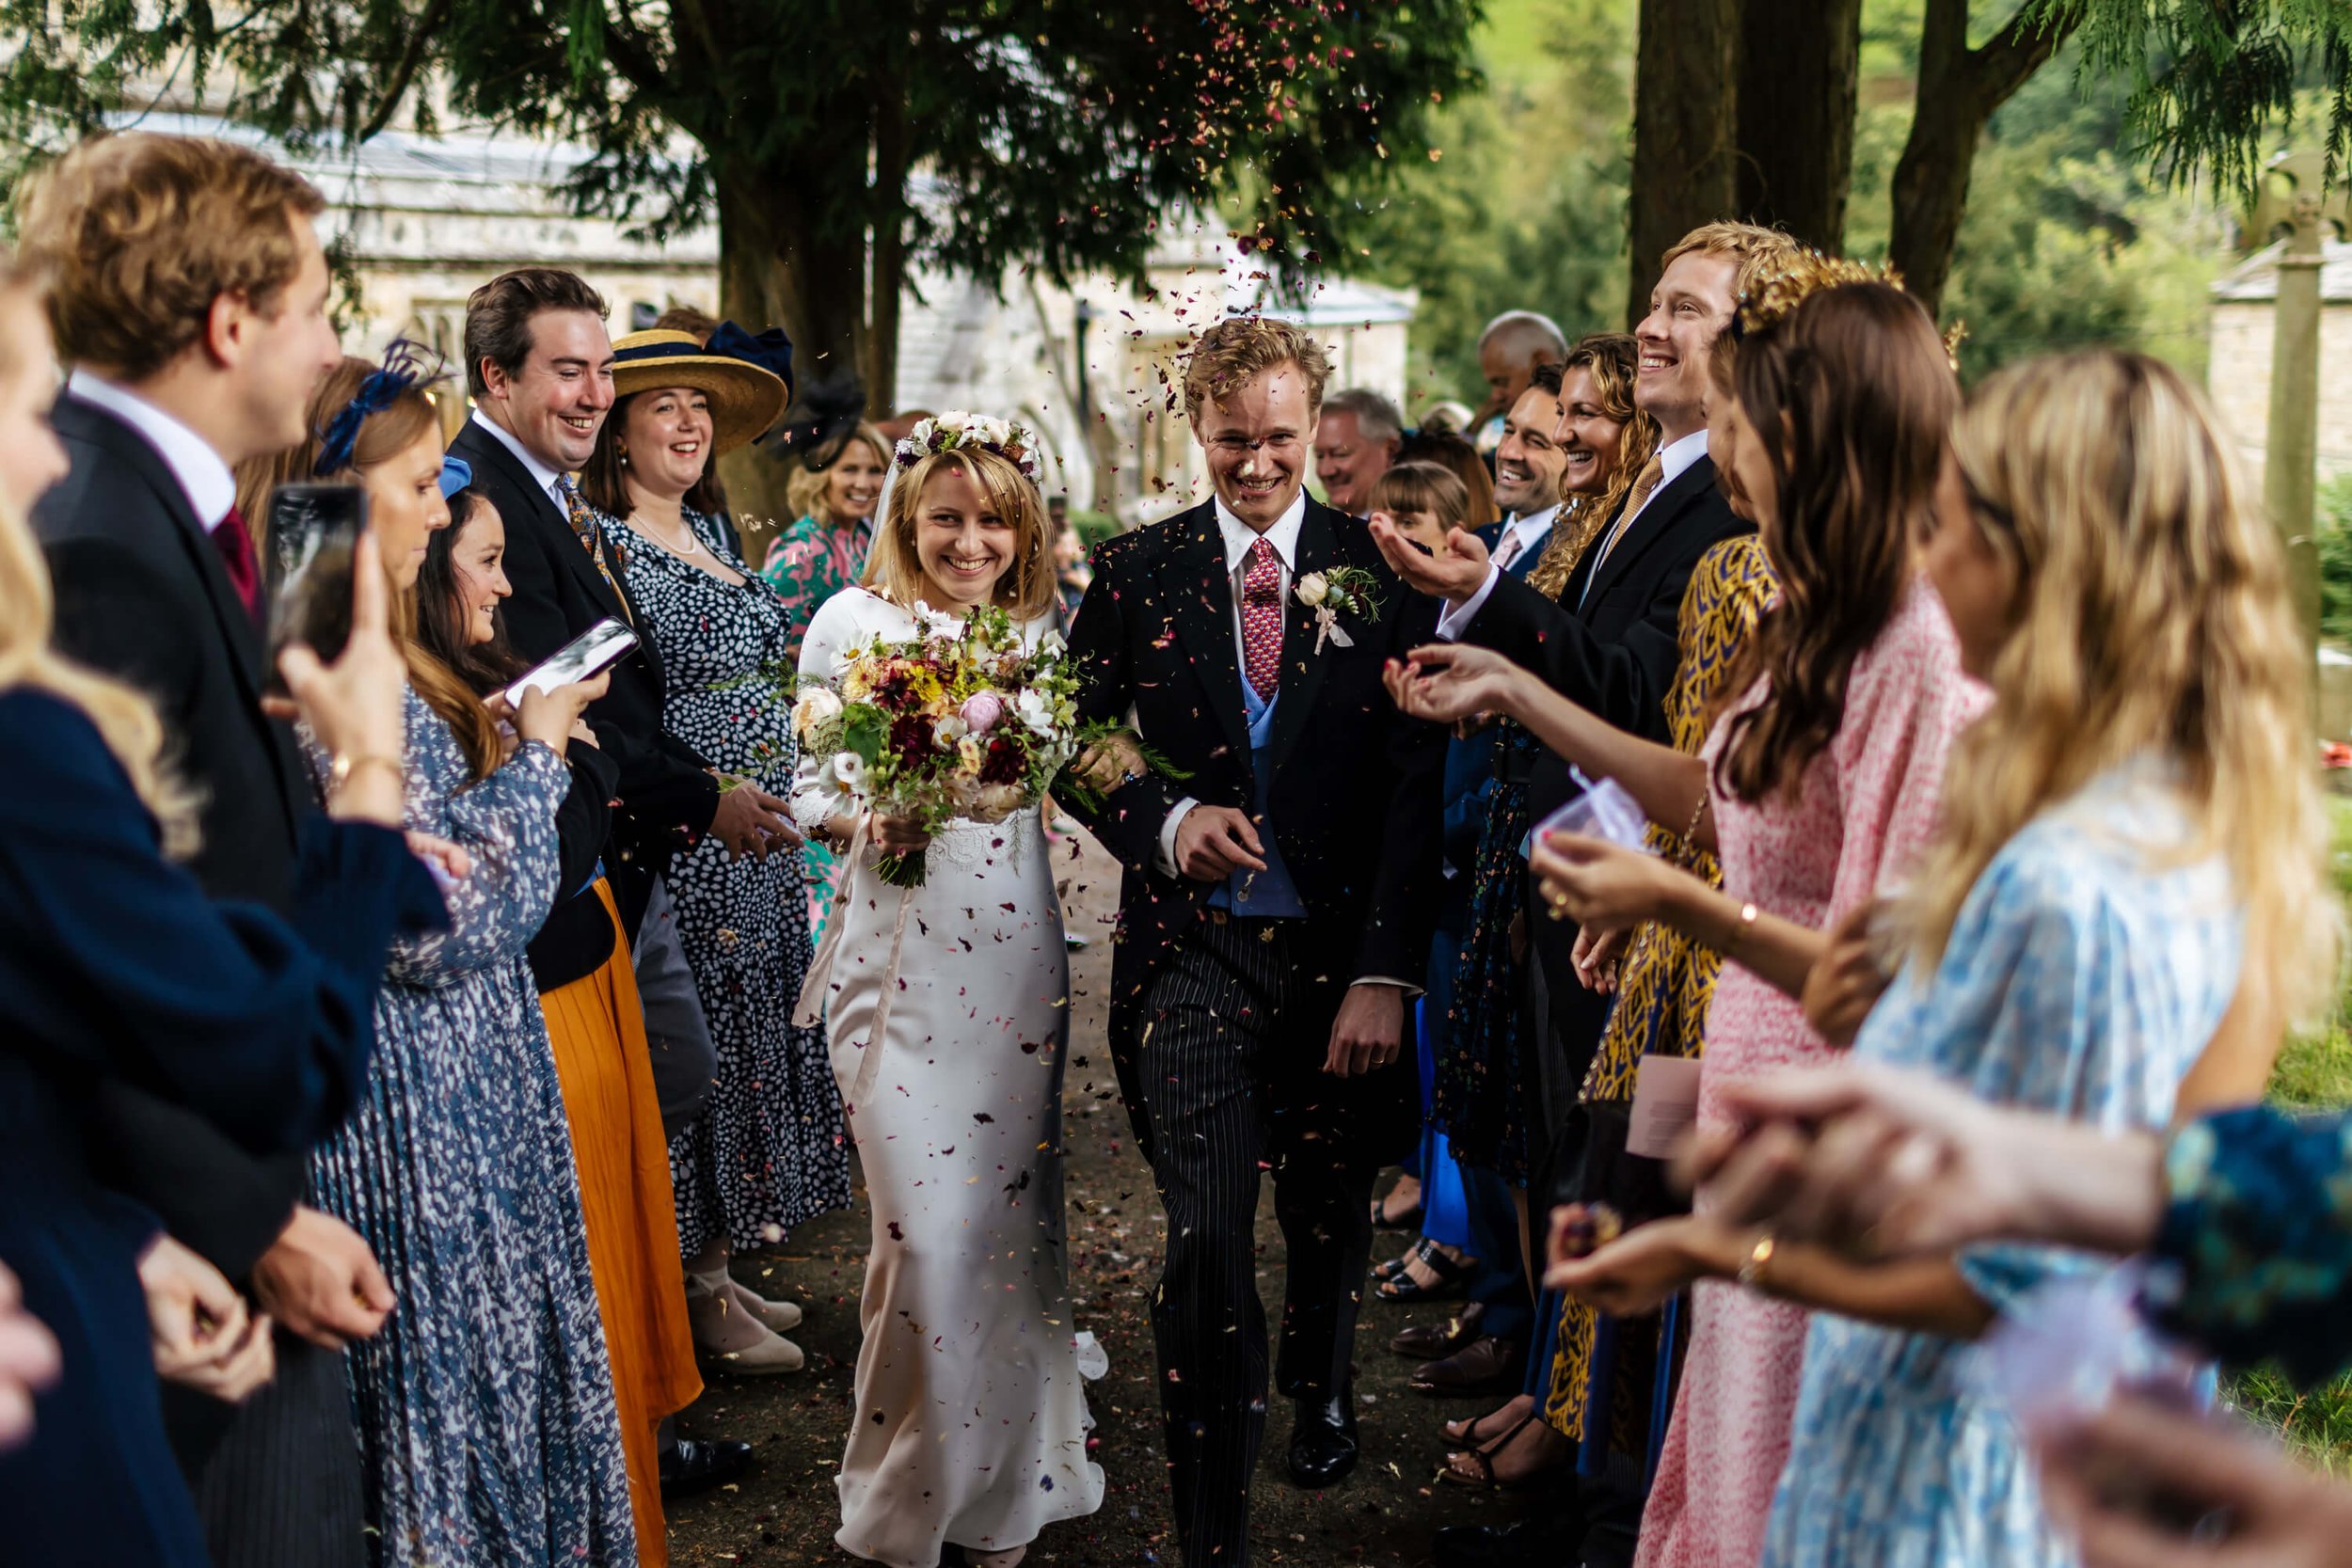 Throwing confetti over the bride and groom at a Burnsall Church wedding